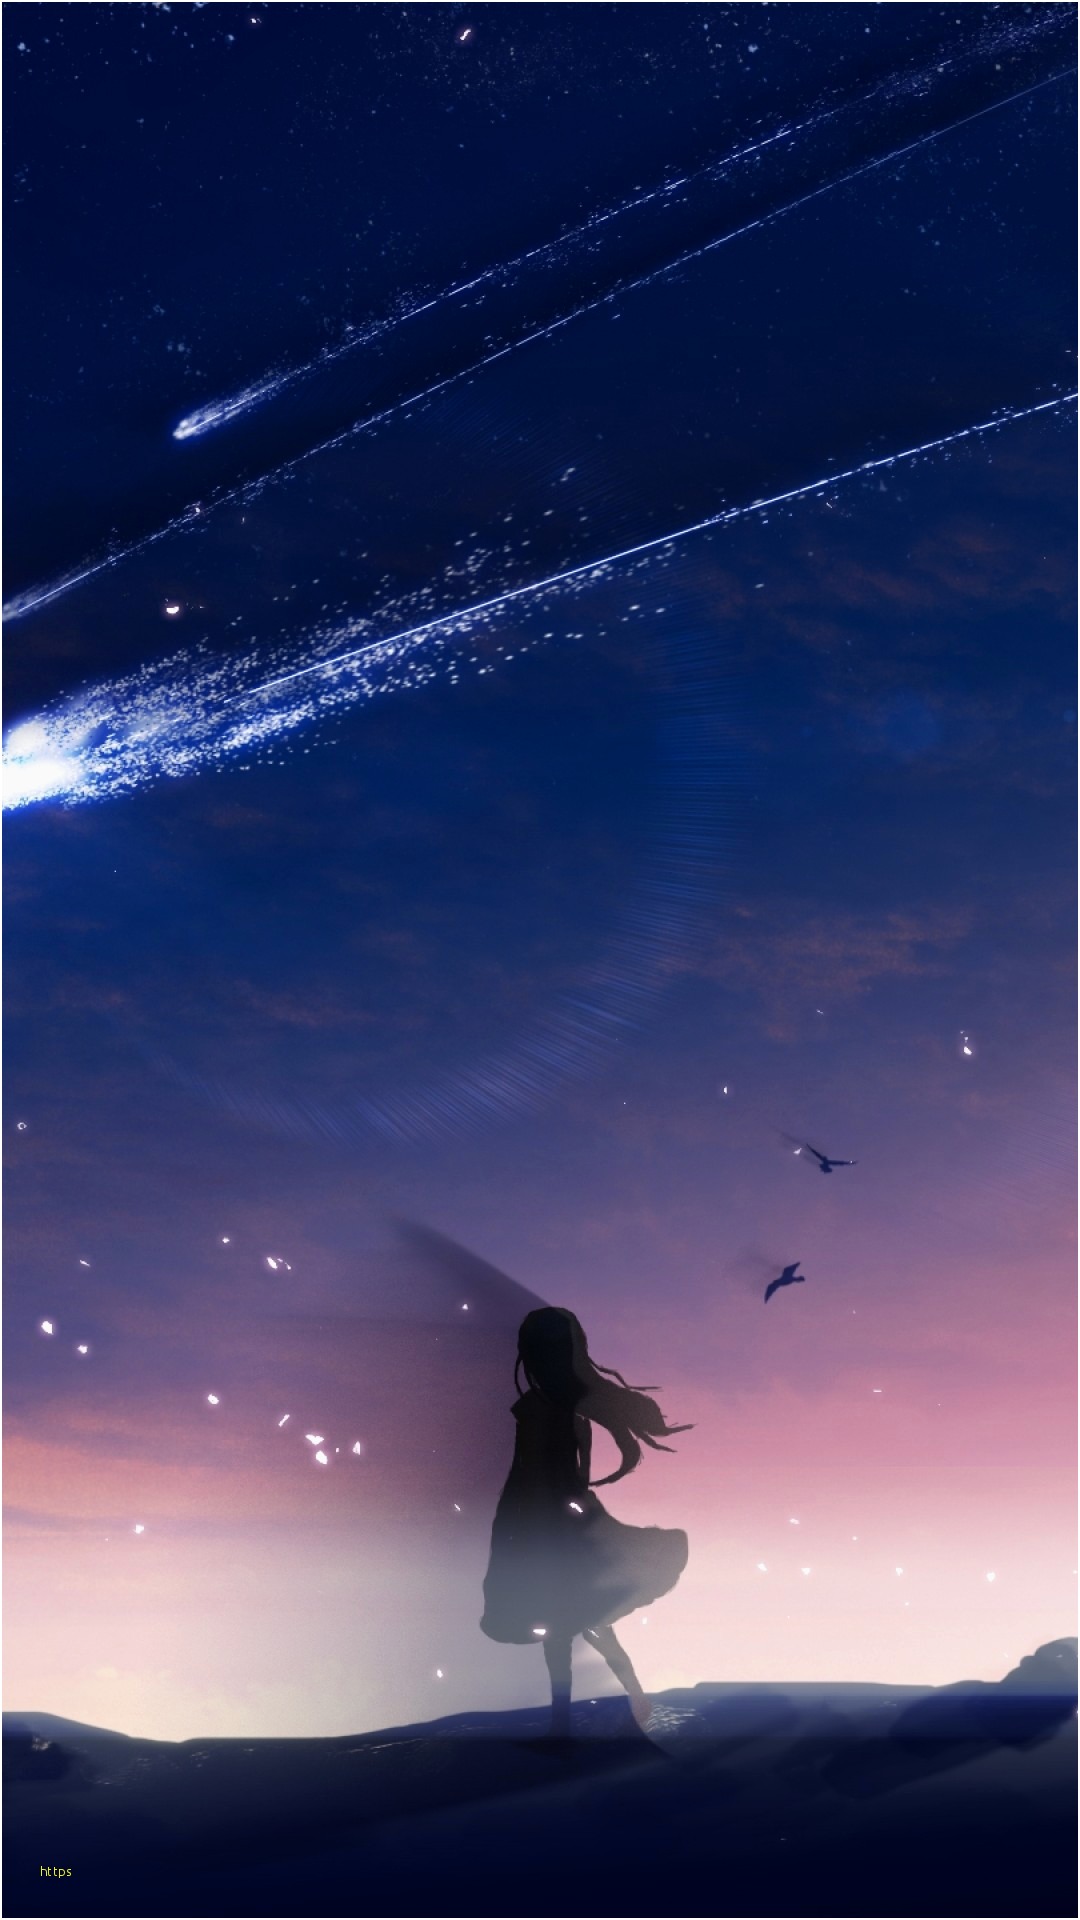 Anime Scenery Wallpaper on the App Store